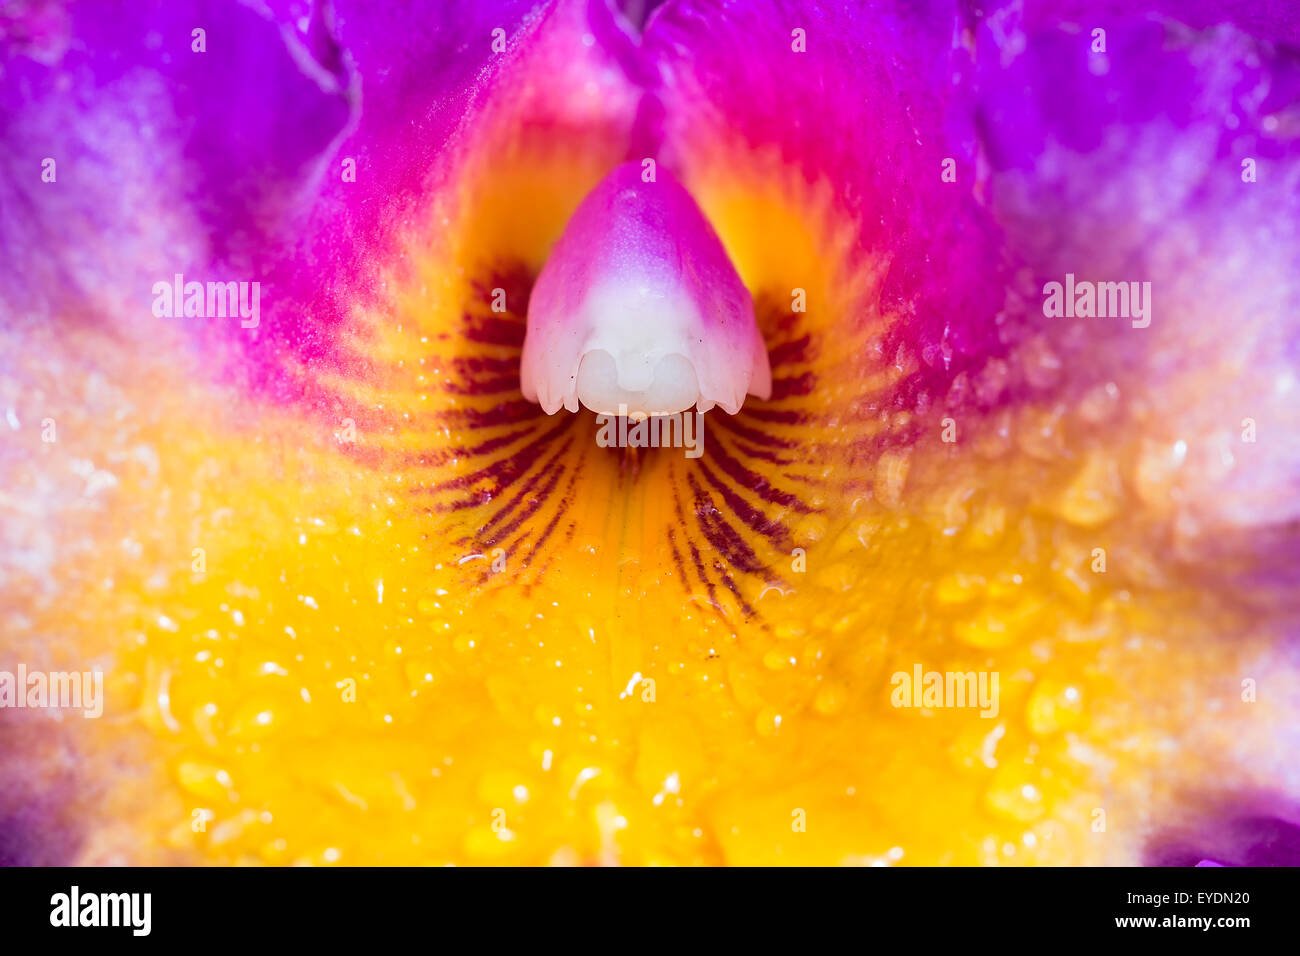 A close-up view of the inside of a colorful cattleya orchid Stock Photo